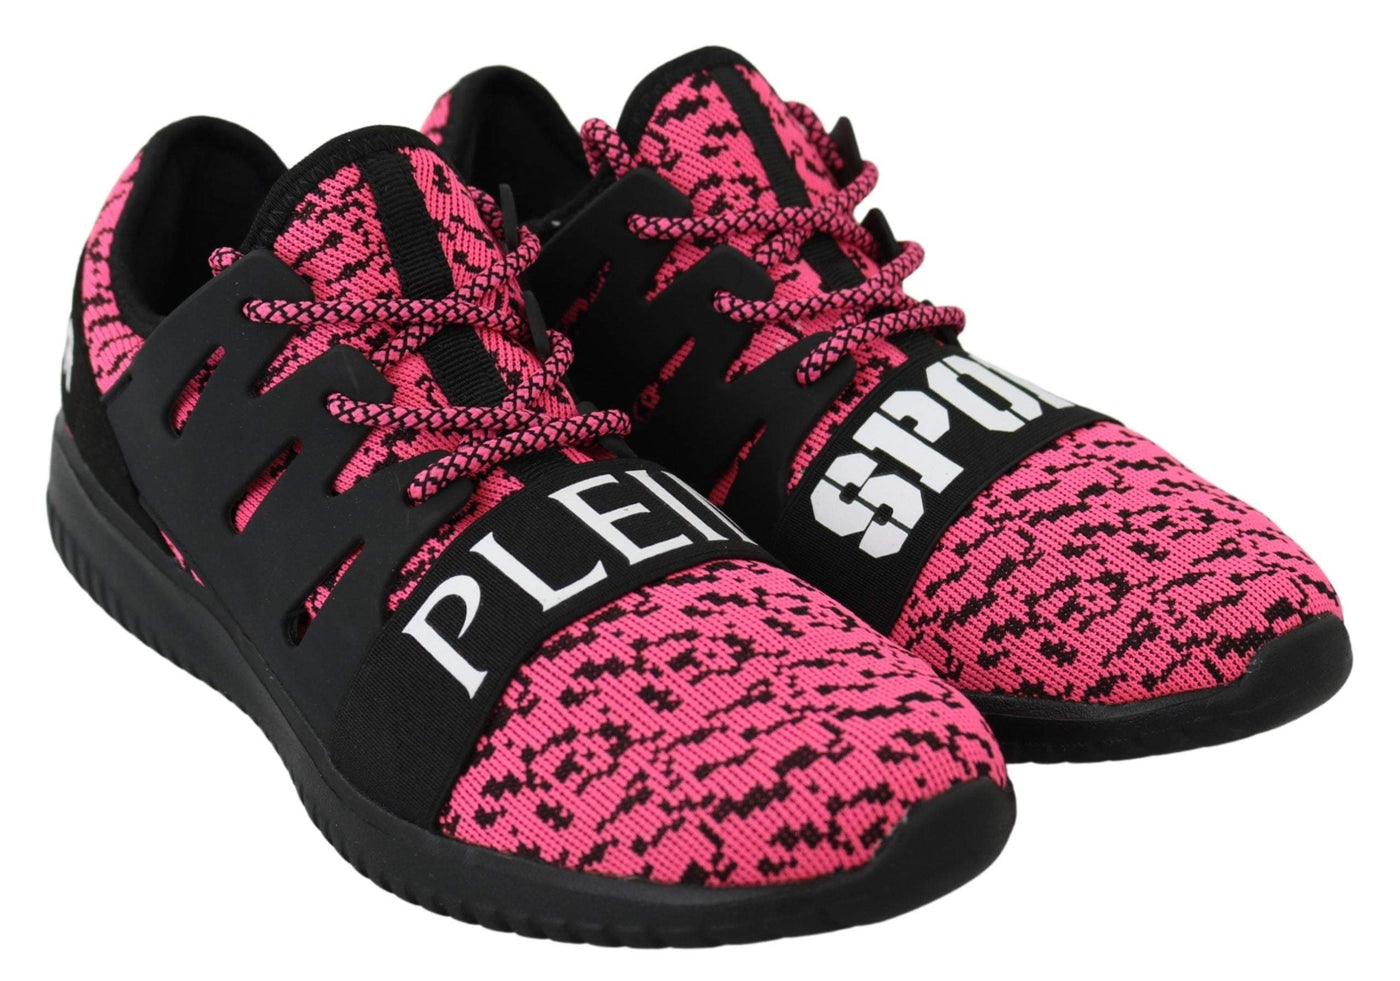 Plein Sport Pink Blush Polyester Runner Joice Sneakers Black, EU36/US6, EU37/US7, EU38/US8, EU39/US9, feed-1, Plein Sport, Shoes - New Arrivals, Sneakers - Women - Shoes at SEYMAYKA